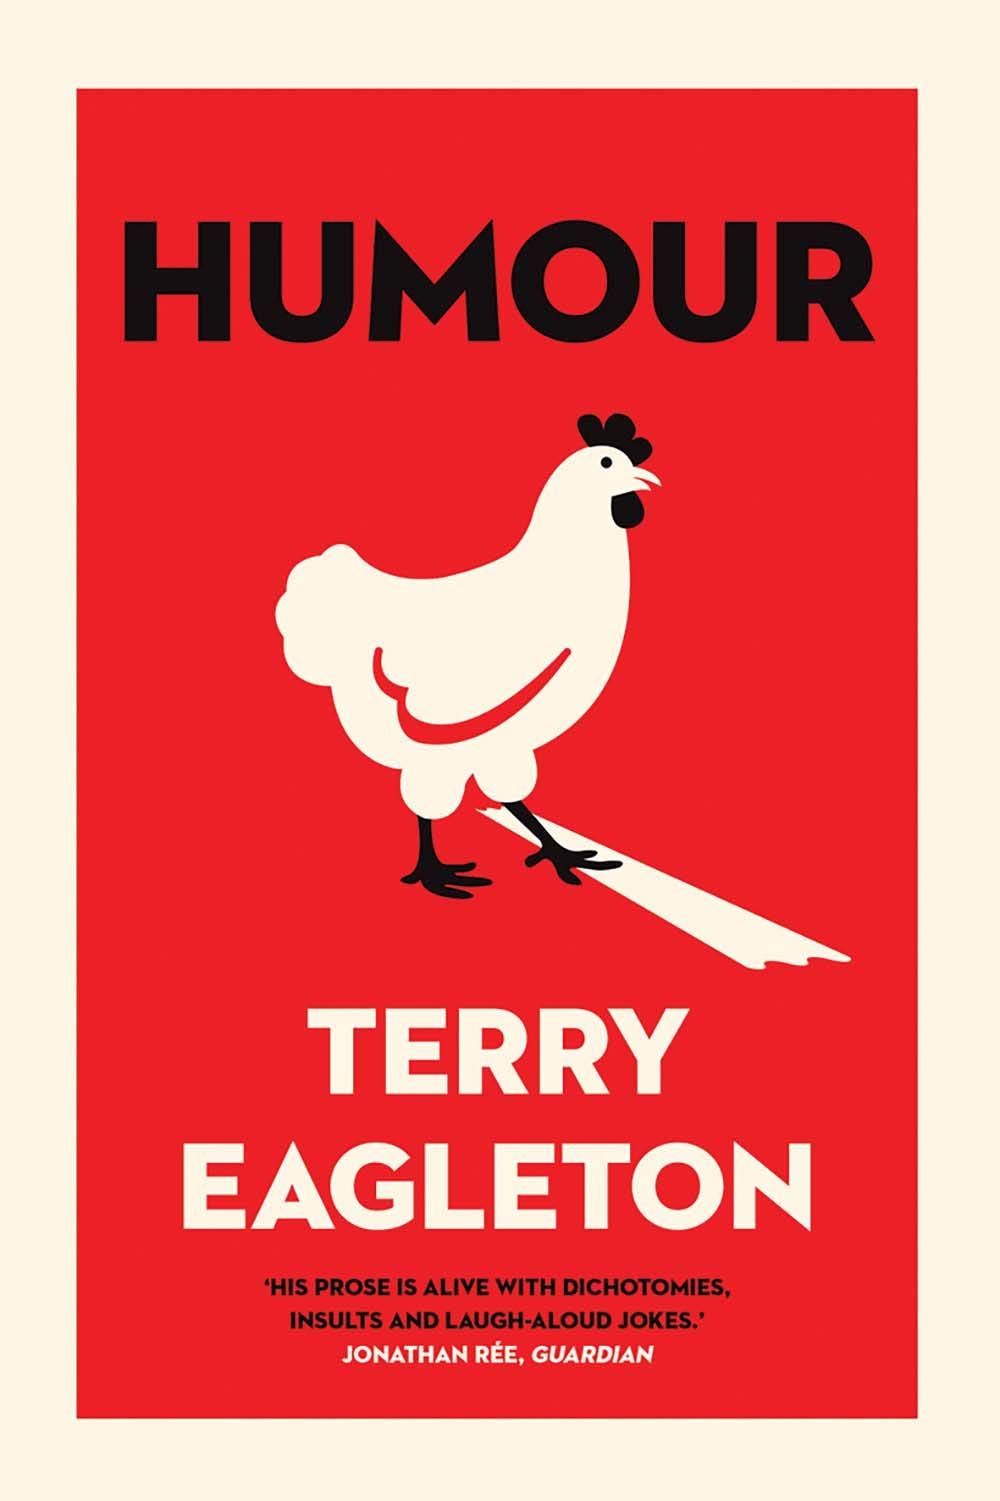 Our Predicament Is No Joke: On Terry Eagleton’s “Humour”